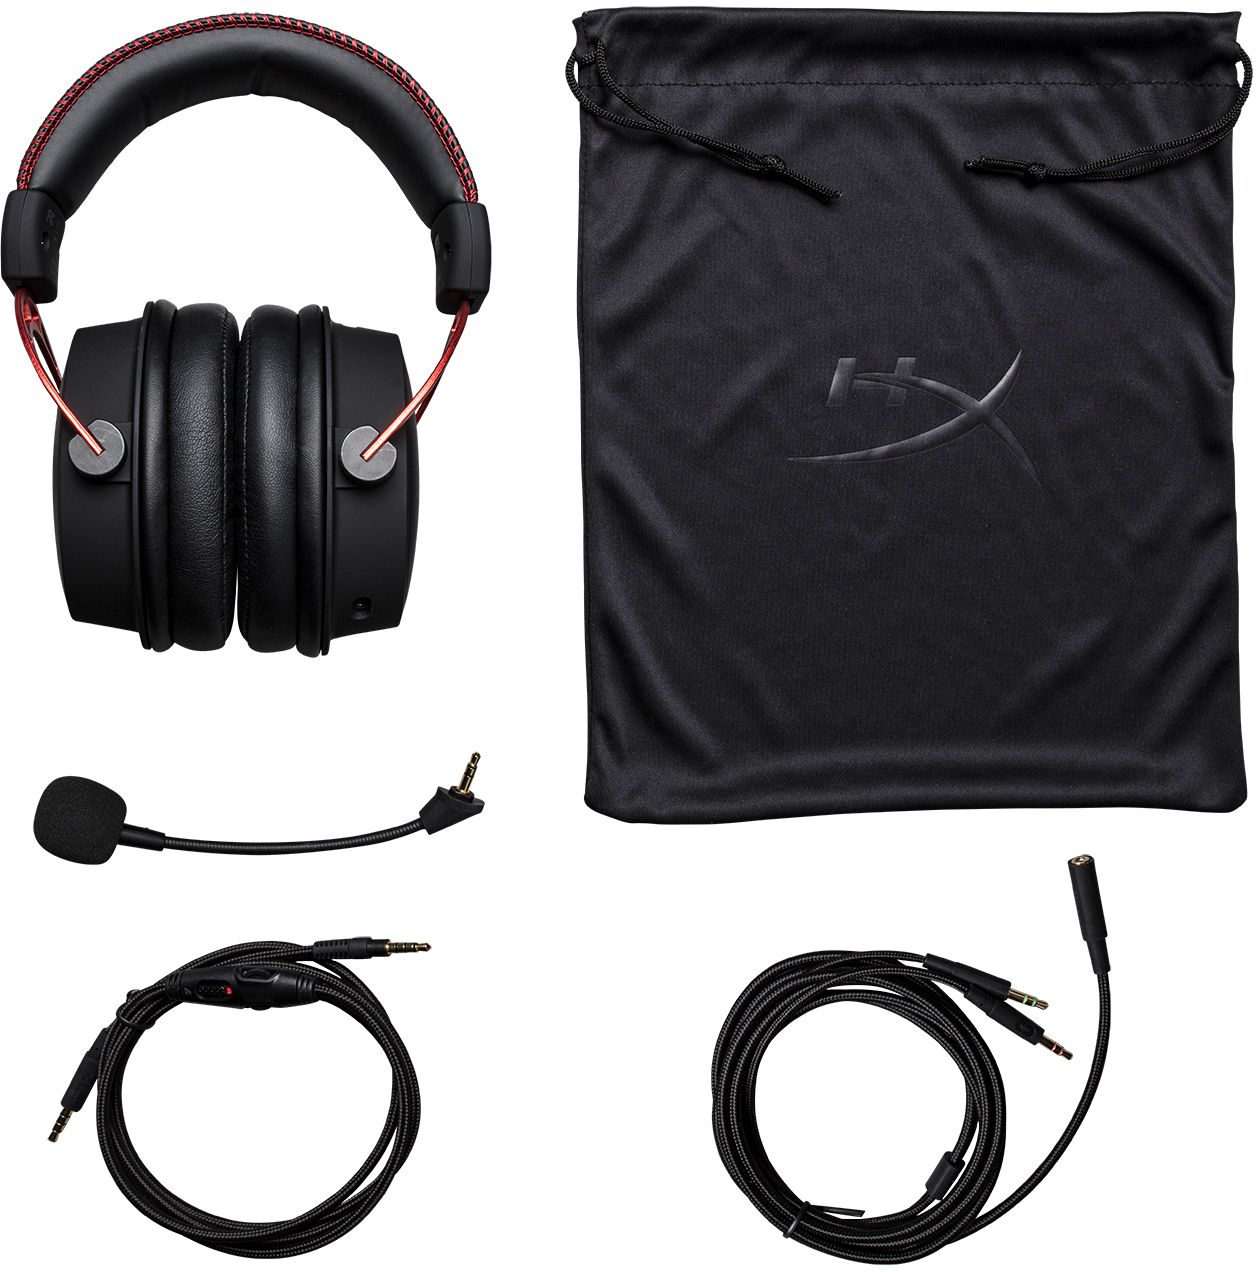 Garantie wet Nacht HyperX Cloud Alpha Wired Stereo Gaming Headset for PC, Xbox X|S, Xbox One,  PS5, PS4, Nintendo Switch, and Mobile Red/black 4P5L1AA#ABL/HX-HSCA-RD/AM -  Best Buy